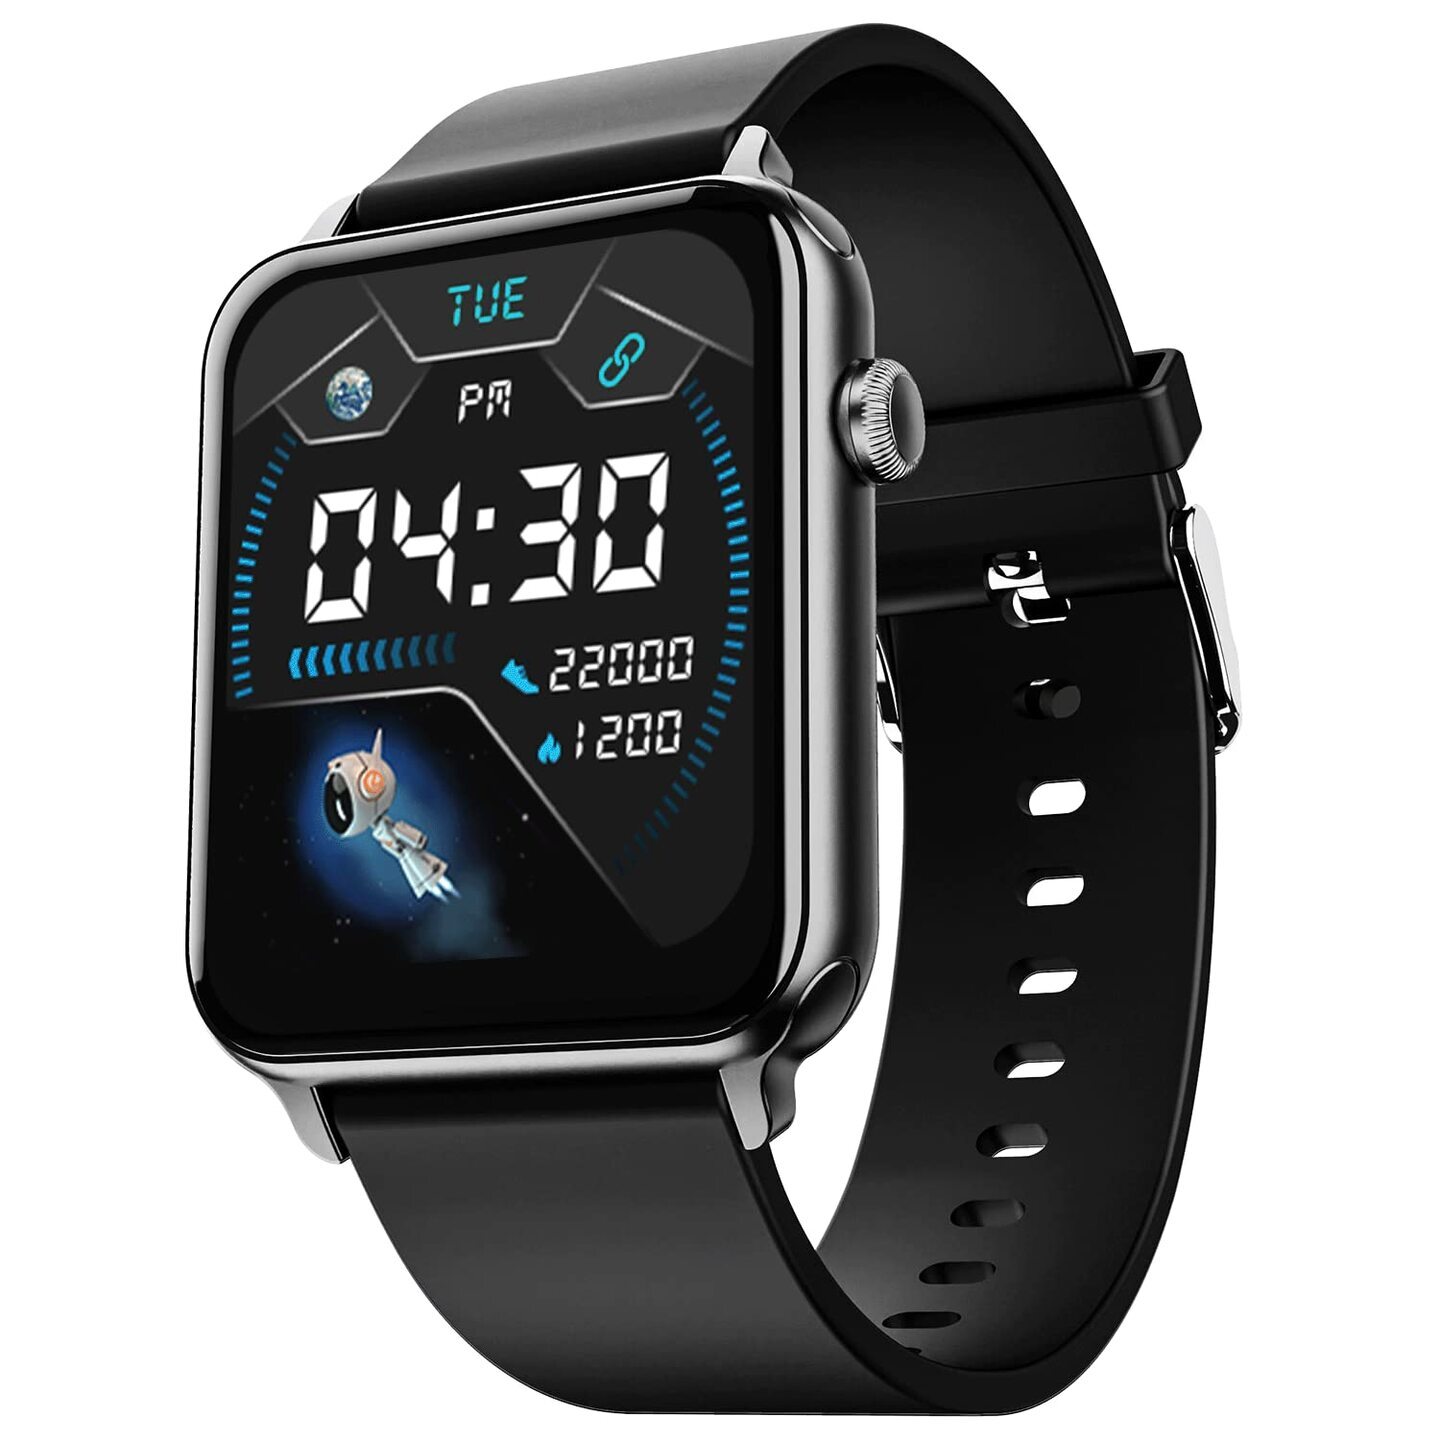 boAt Wave Lite Smart Watch with HR & SpO2 Level Monitor, 140+ Watch Faces, Activity Tracker & 7 Days Battery Life